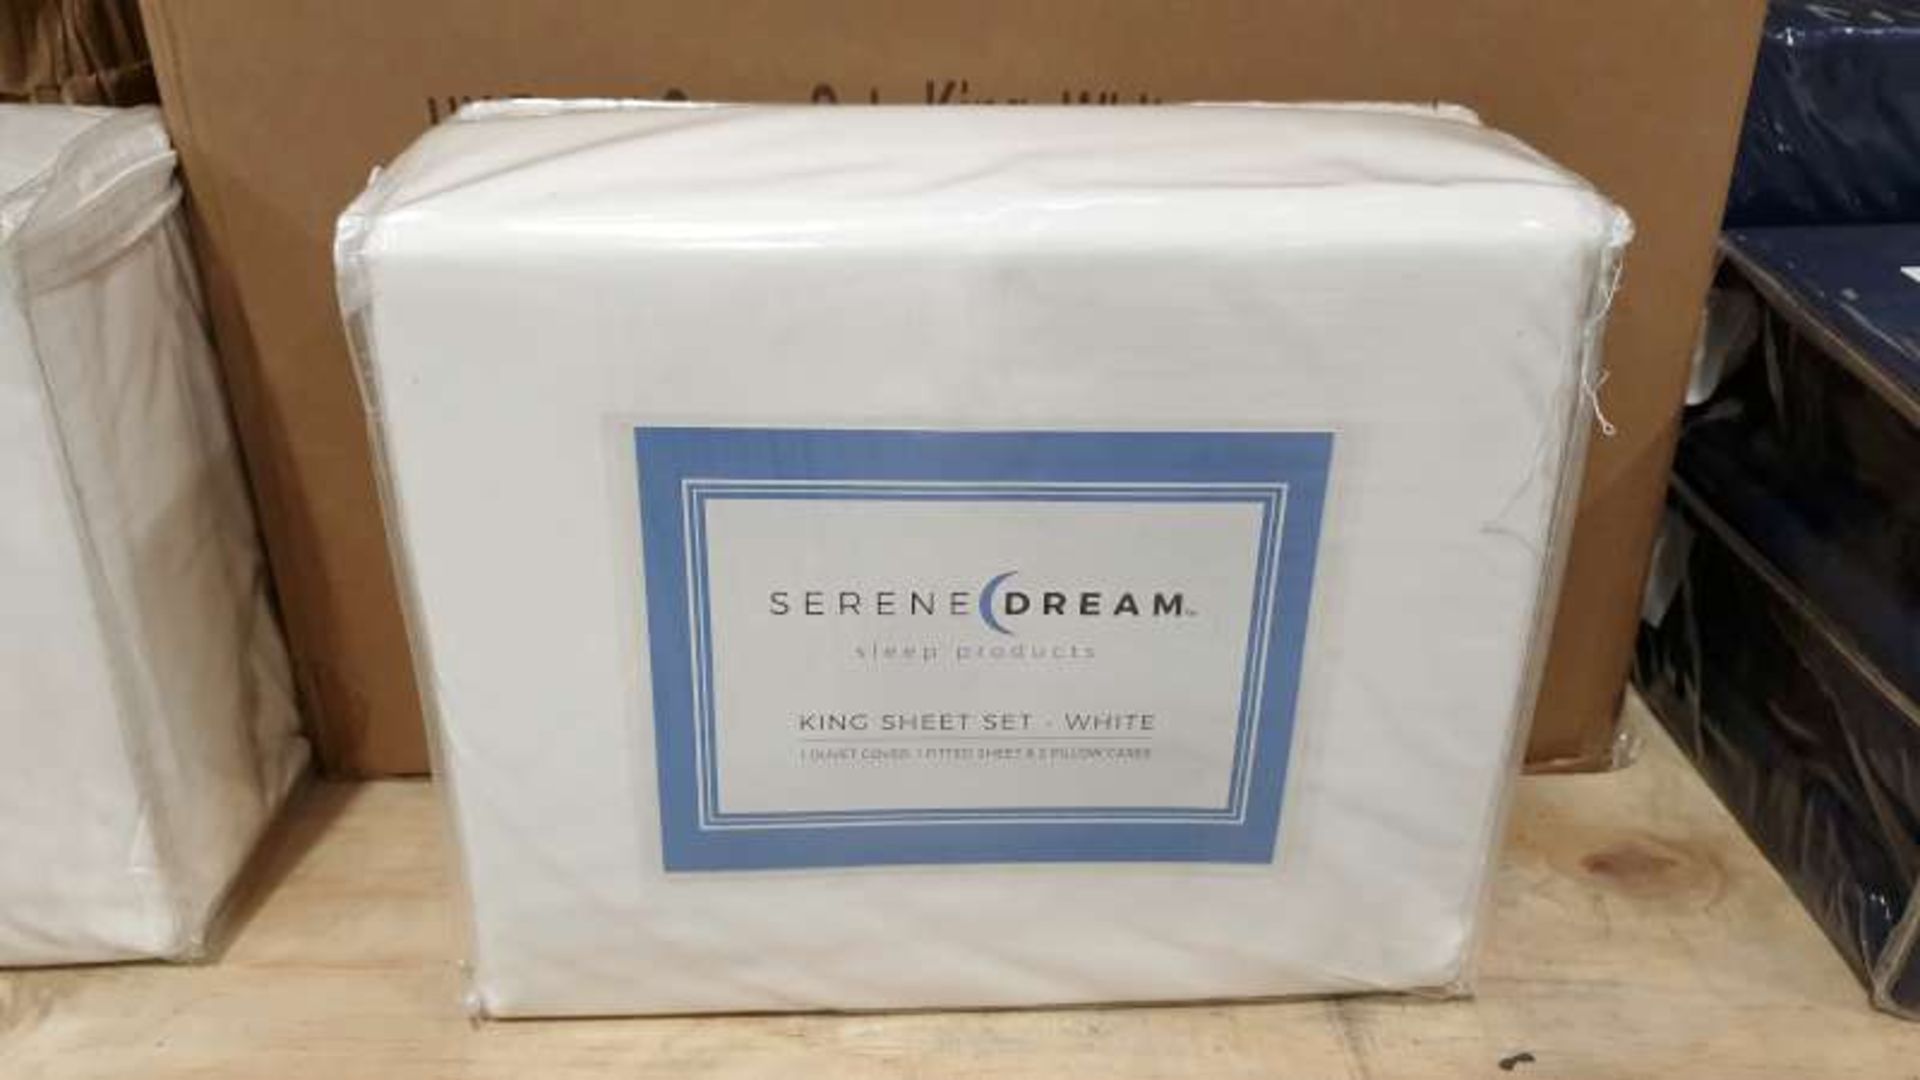 18 X WHITE COLOURED SERENE DREAMS KING SIZE DUVET SETS EACH SET CONTAINS DUVET COVER, FITTED SHEETS,